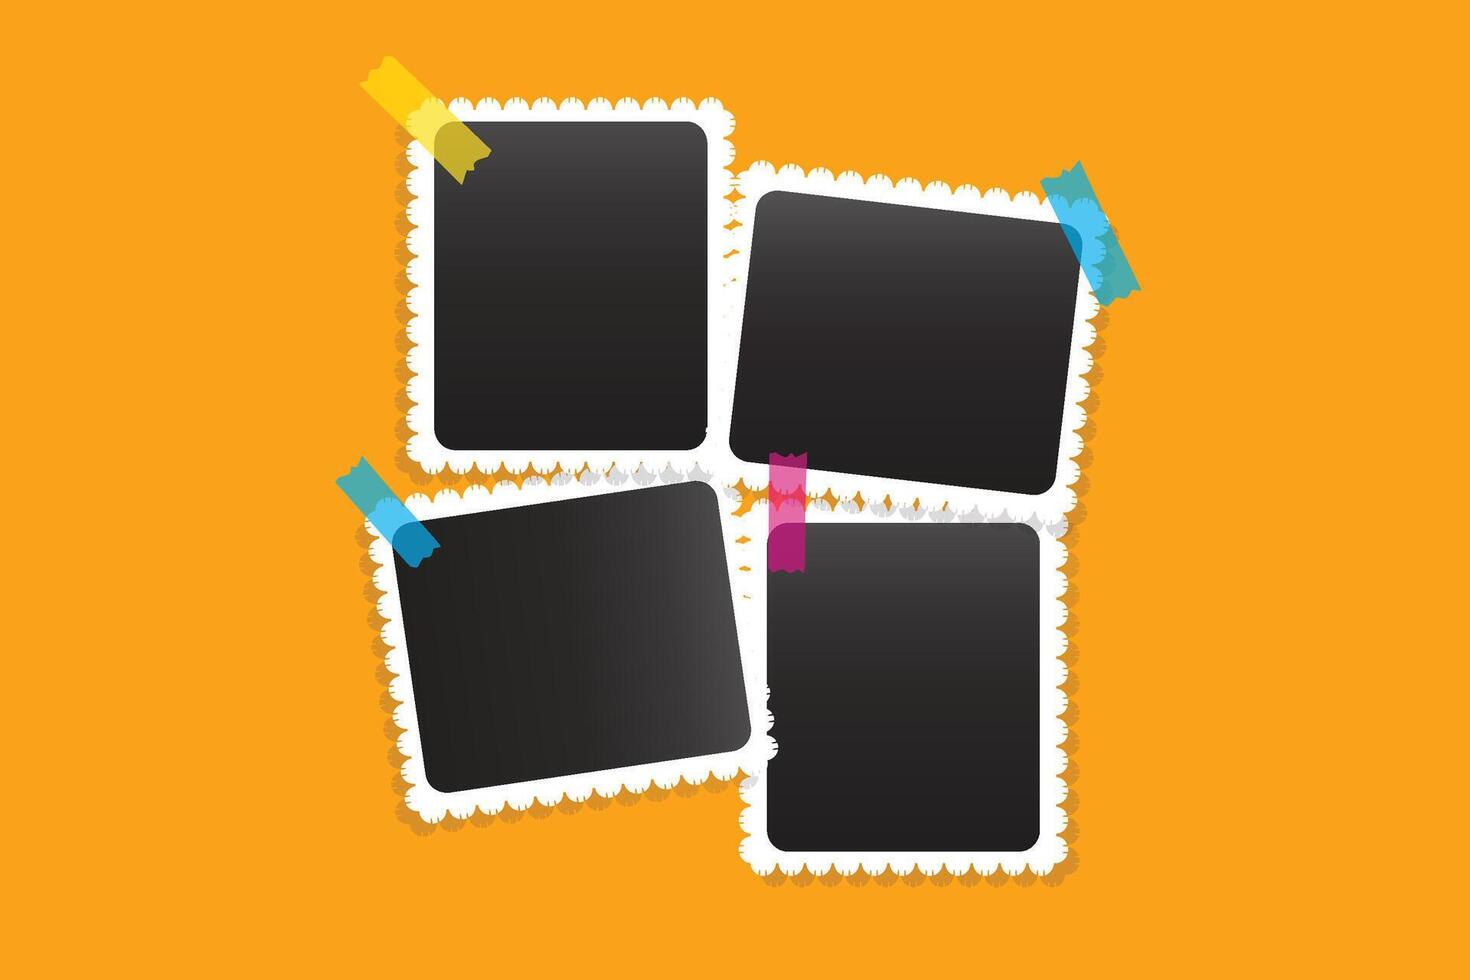 photo frames on yellow background design vector